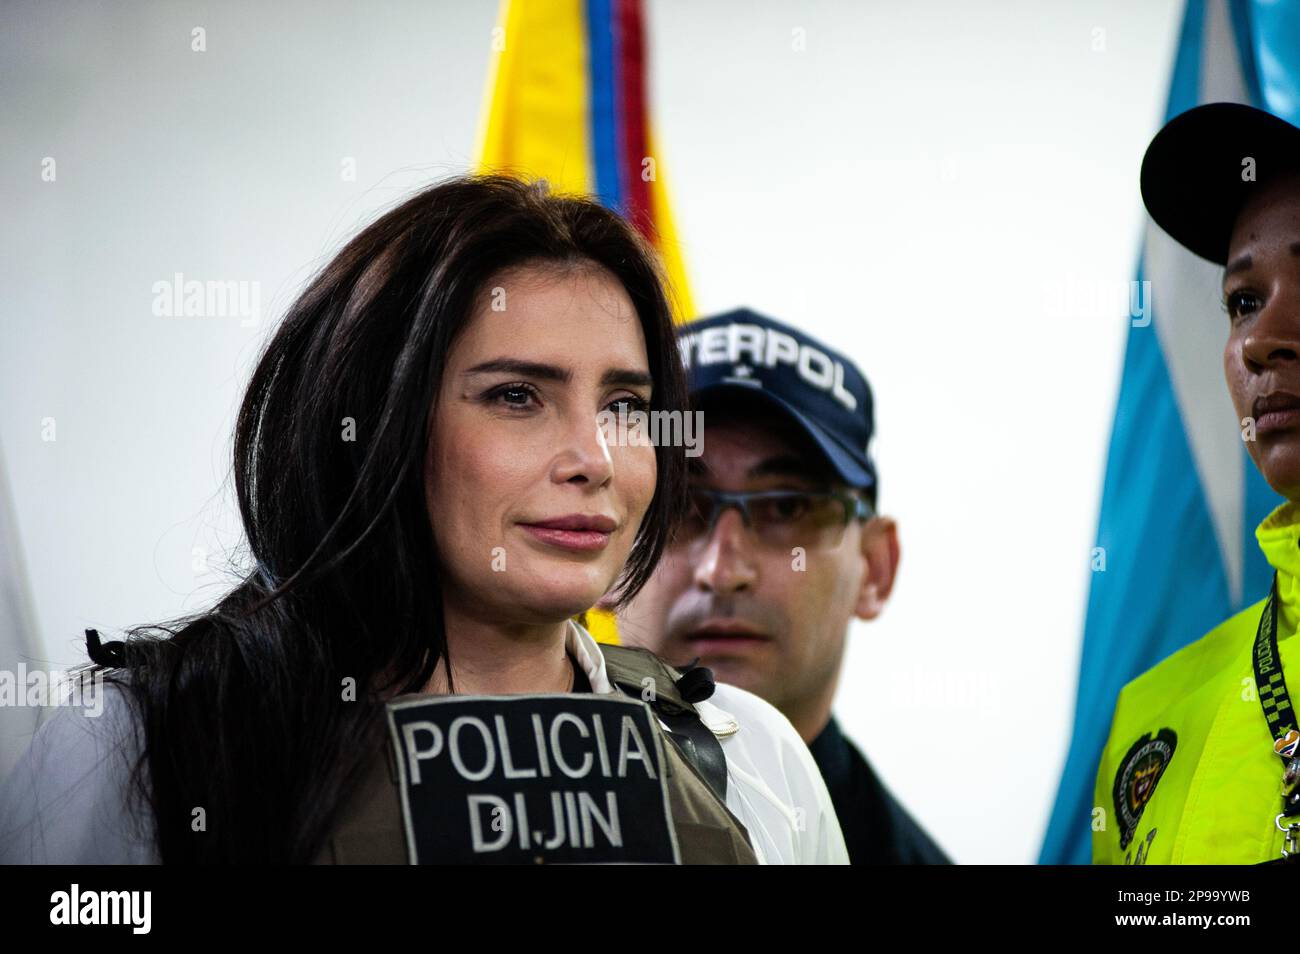 Aida Merlano, former Colombian senator convicted of vote buying and fleeing from justice attends the identification review at the Criminal Investigation Directorate (DIJIN) Headquaters after arriving to Bogota, Colombia March 10, 2023. Photo by: Chepa Beltran/Long Visual Press Stock Photo